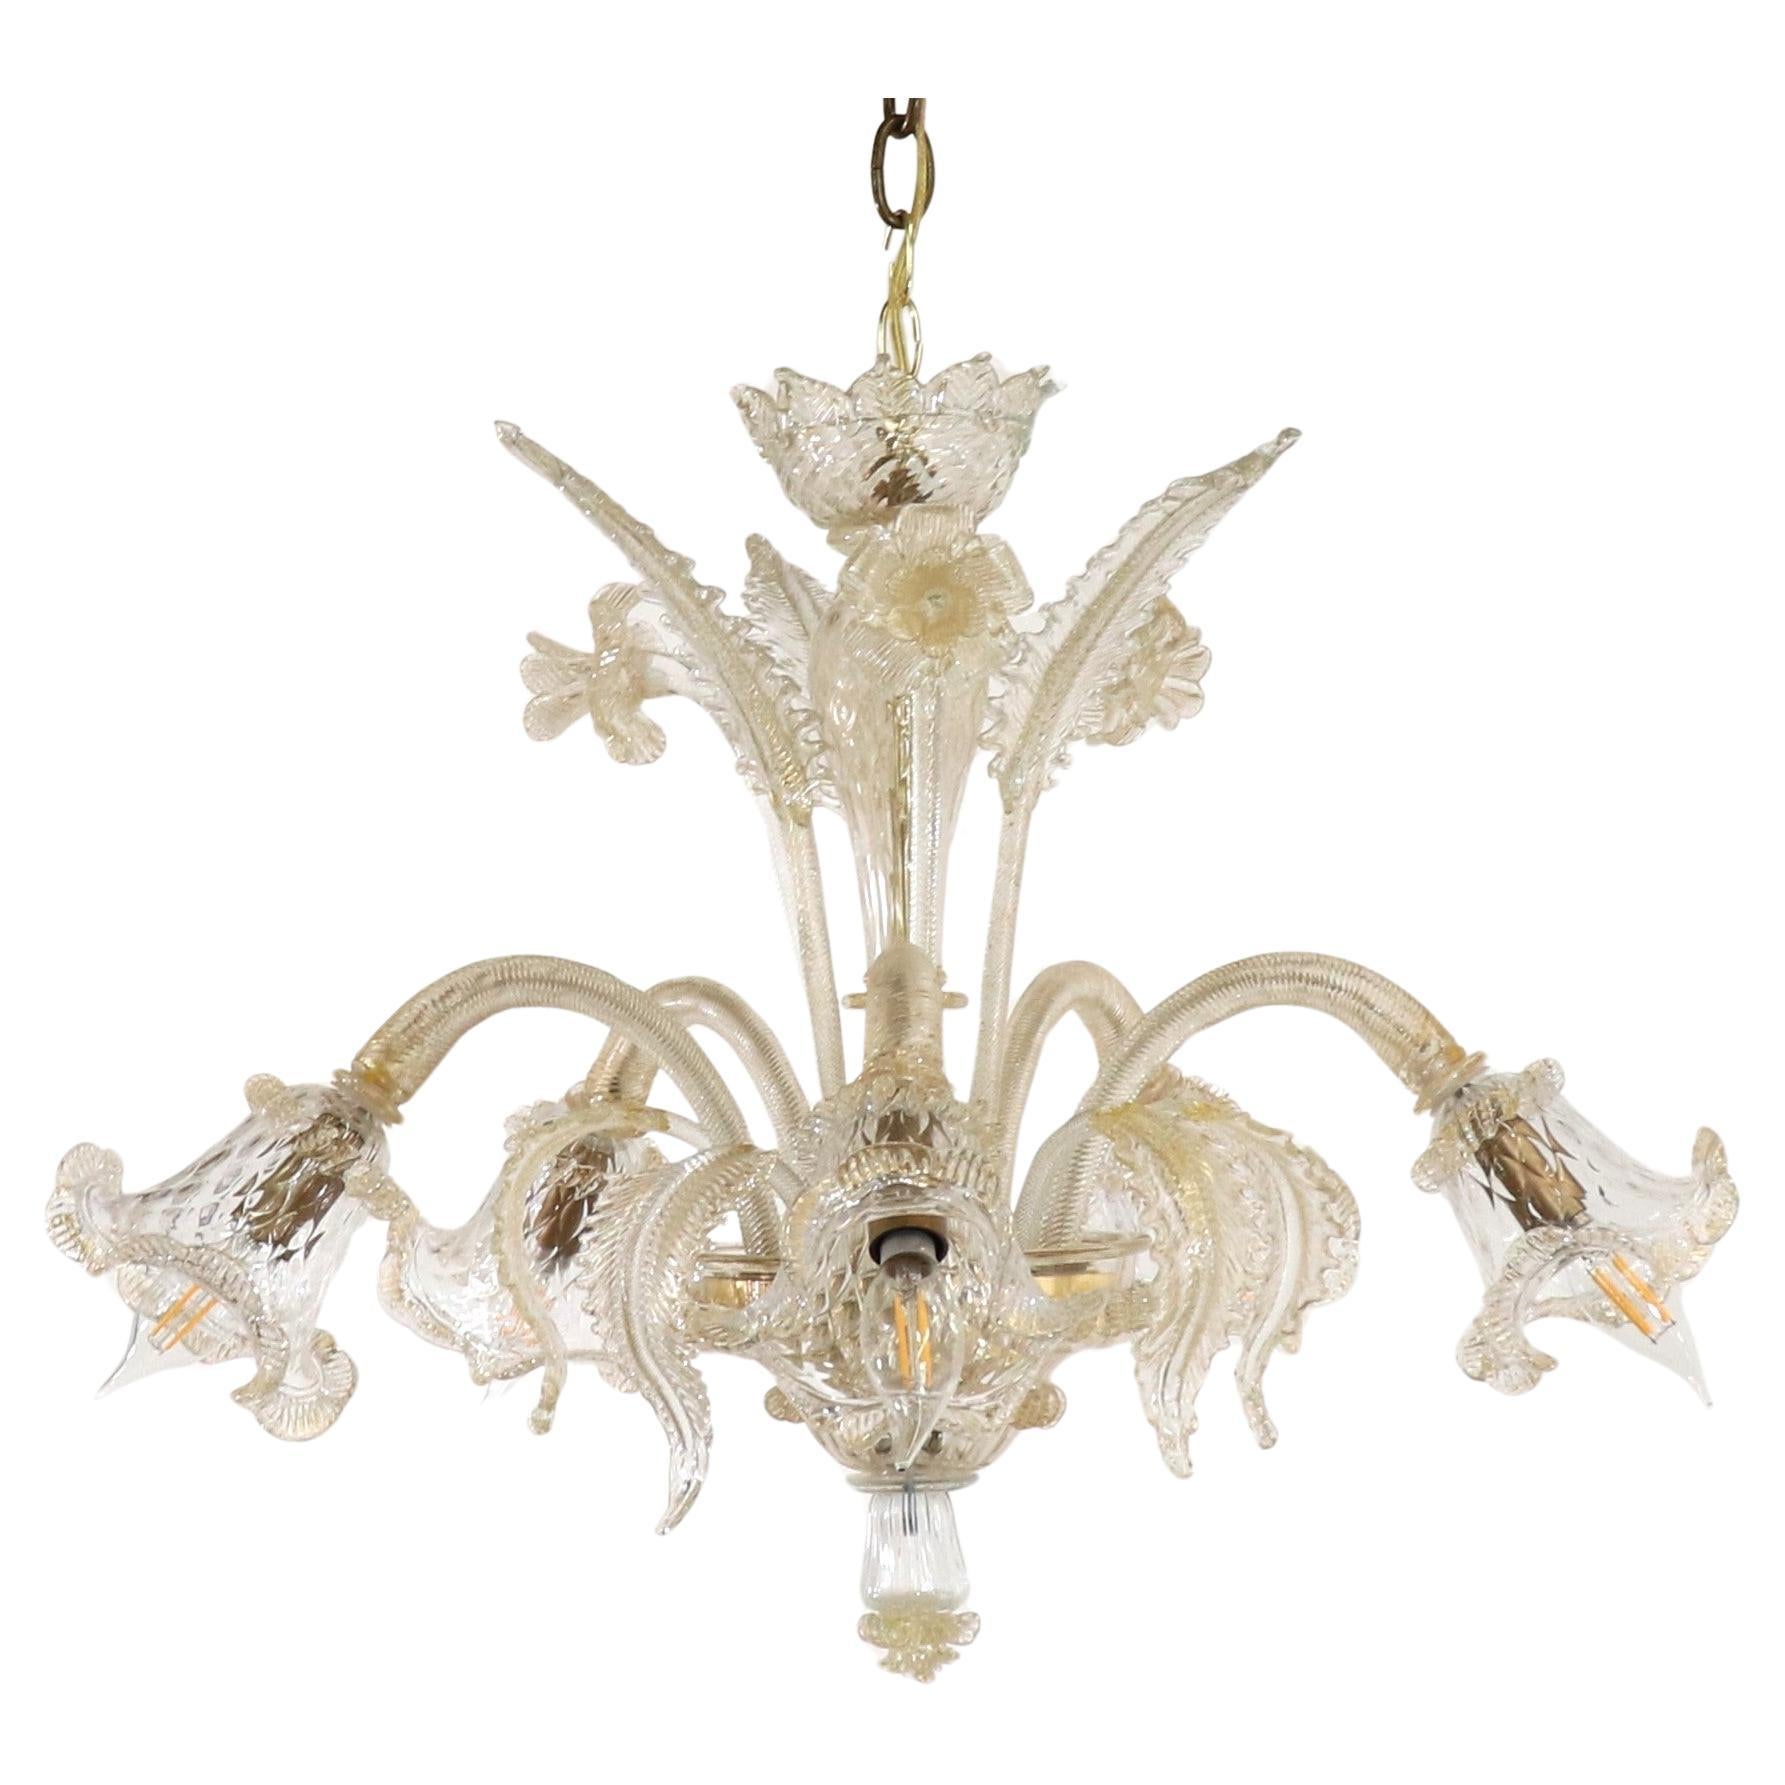  Baroque Style Floral Gold Inflused Five Arm Cristallo Murano Chandelier having  For Sale